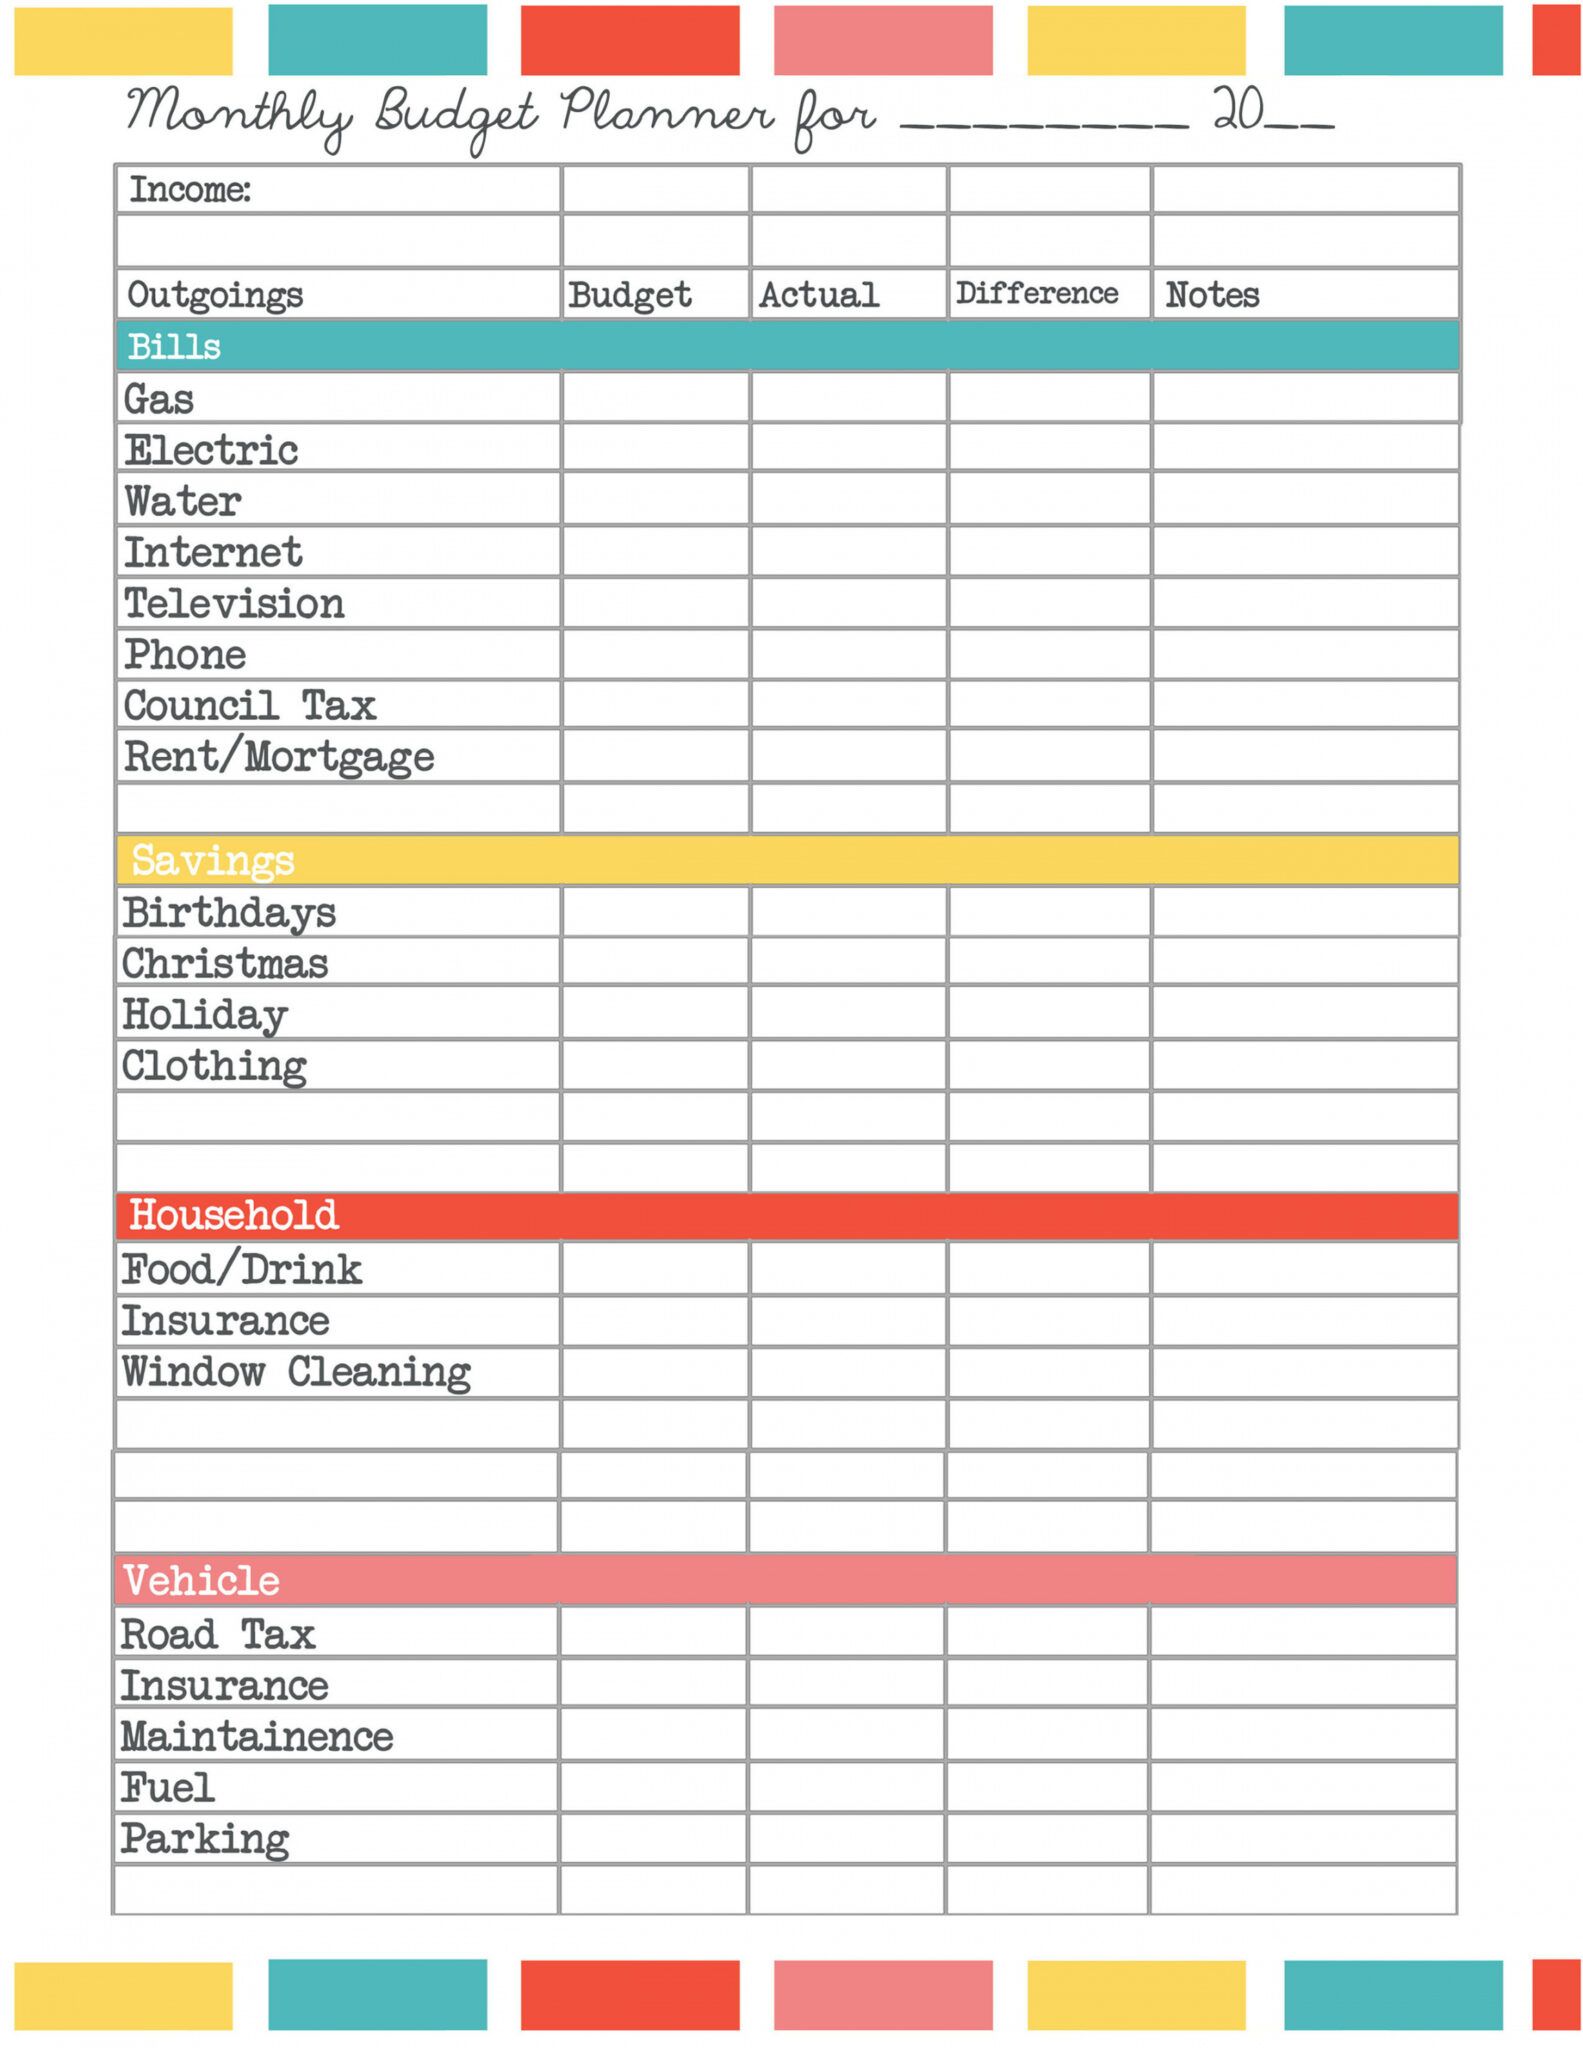 how-to-make-a-simple-budget-spreadsheet-bdachoices